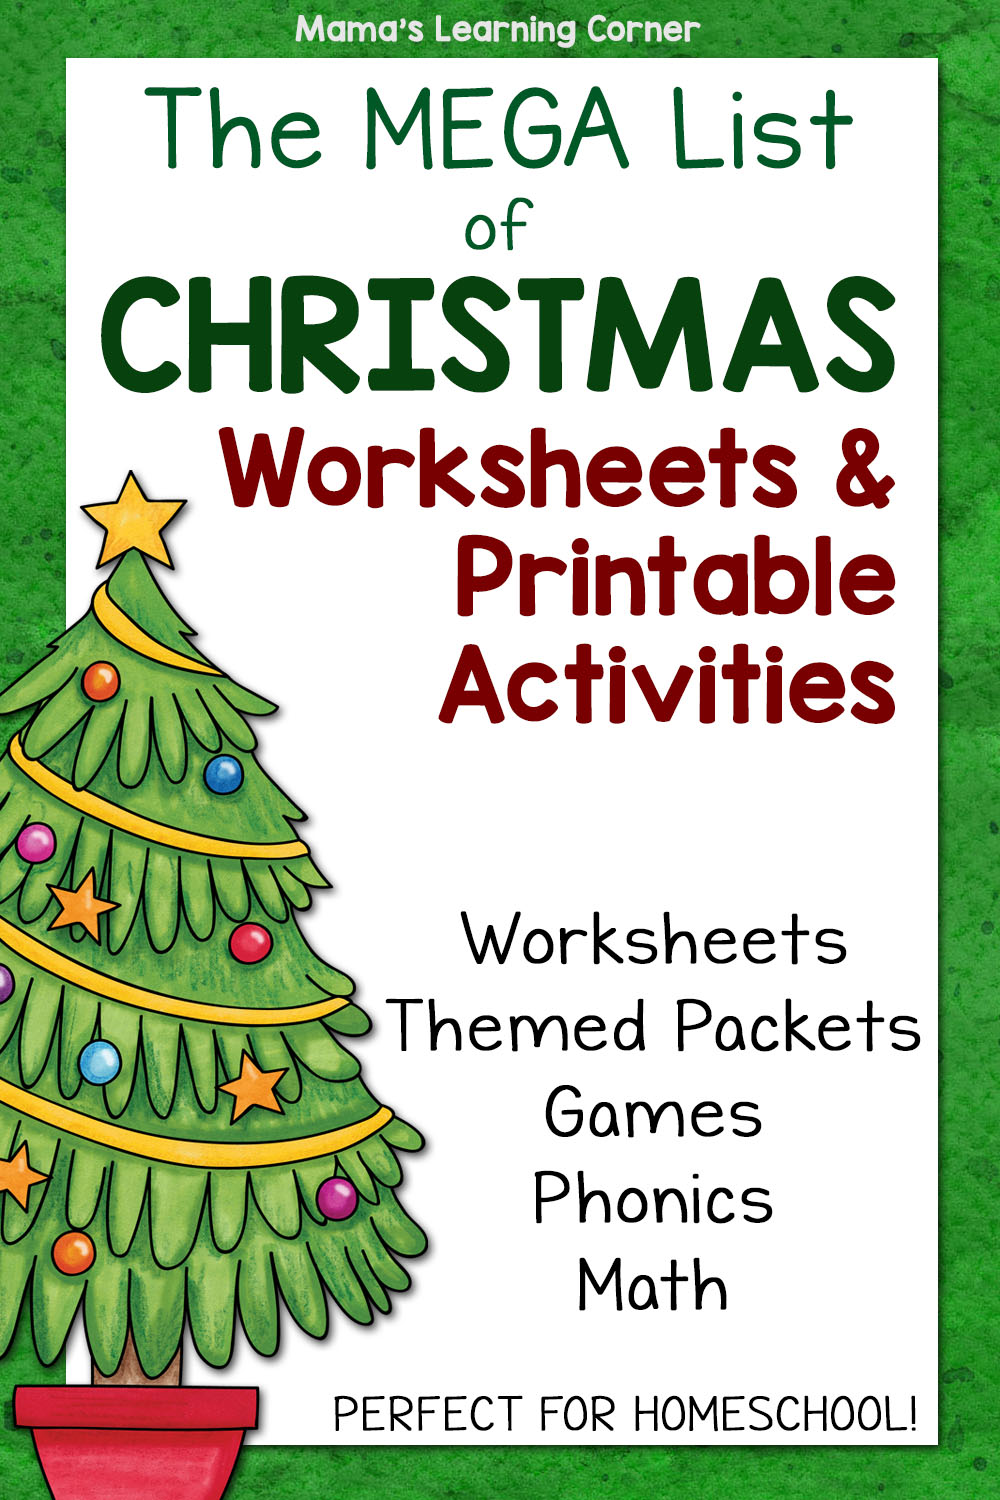 https://www.mamaslearningcorner.com/wp-content/uploads/2015/12/Ultimate-Guide-to-Christmas-Worksheets-and-Printable-Activities-Revised.jpg